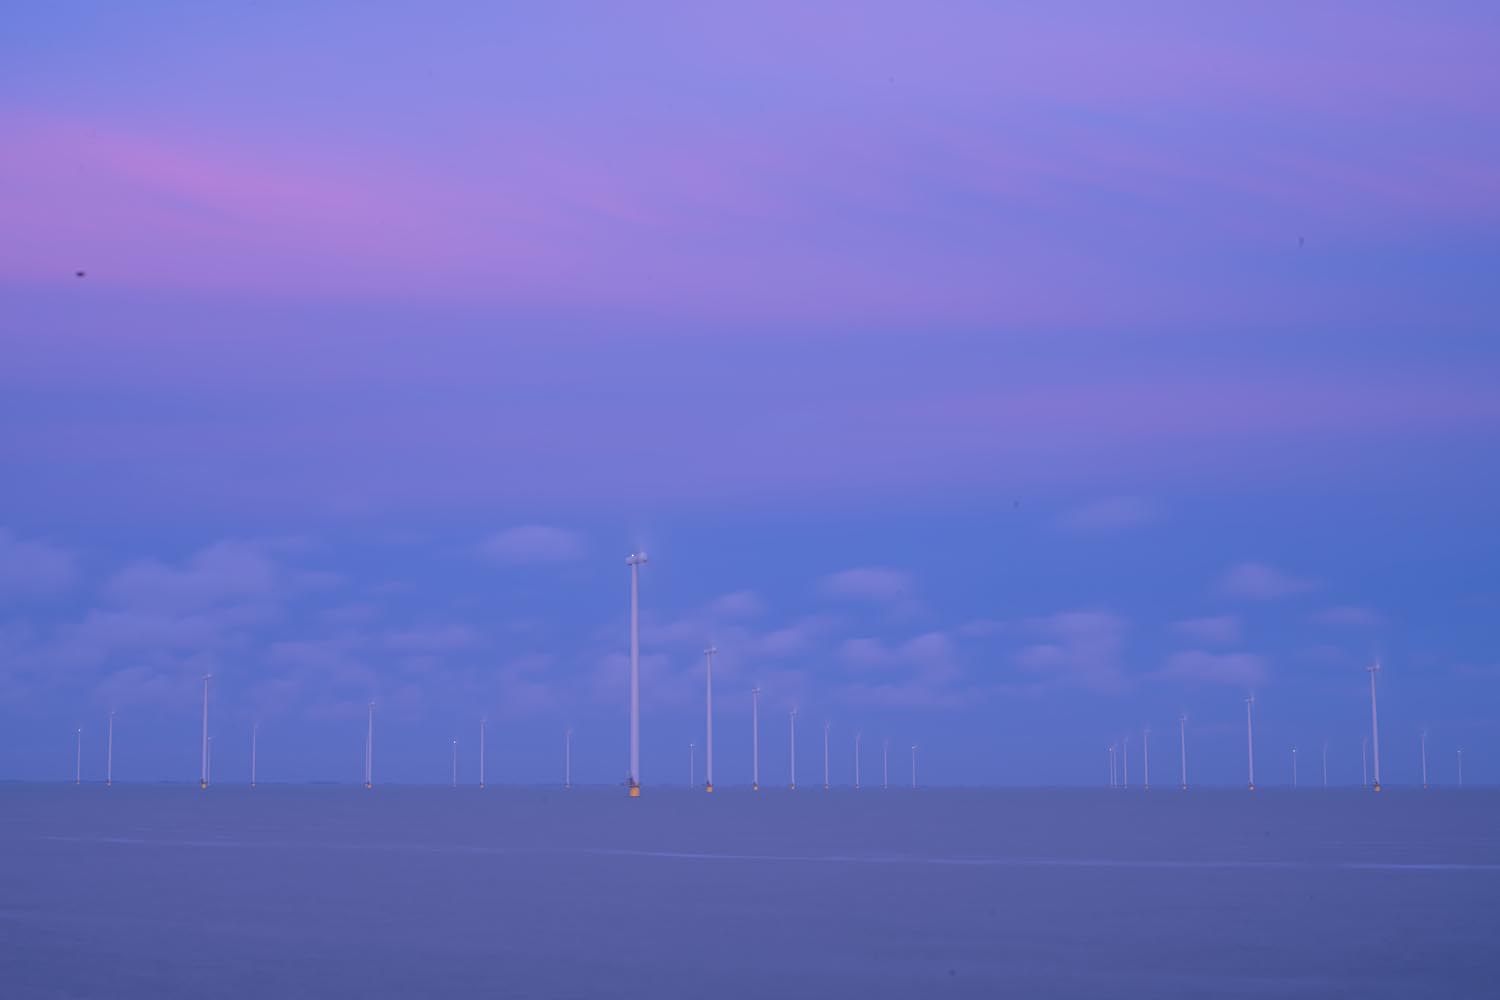 Sites at Risk of Climate Change: Night Landscape Photographs in The Netherlands, Steve Giovinco, Wind Farm Sustainable Energy, Twilight with Beautiful Colors Fryslan, Flevoland